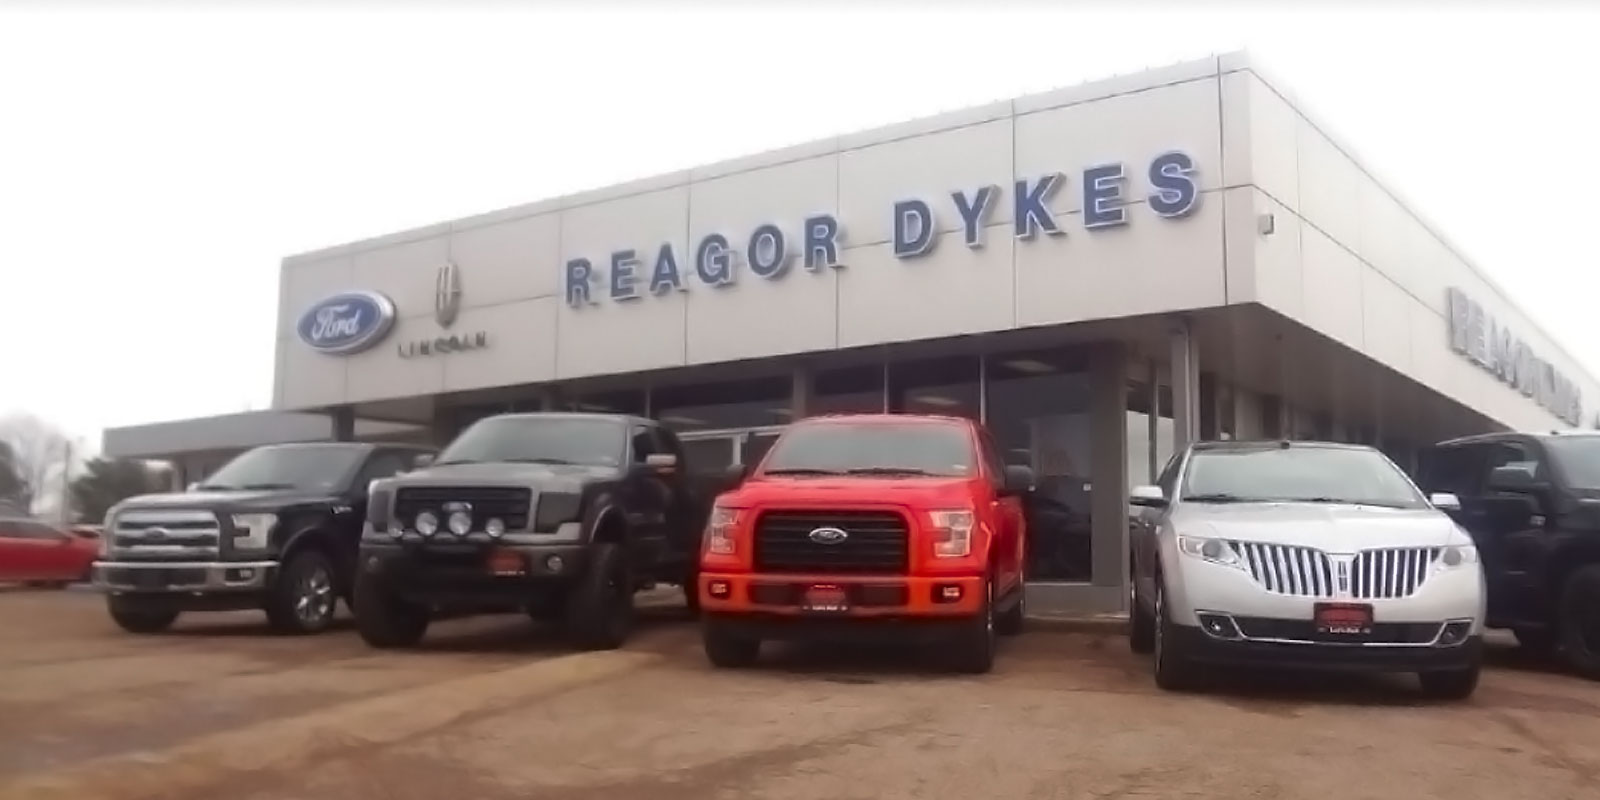 Reagor-Dykes Files Chapter 11 After Ford Credit Calls Debts Due